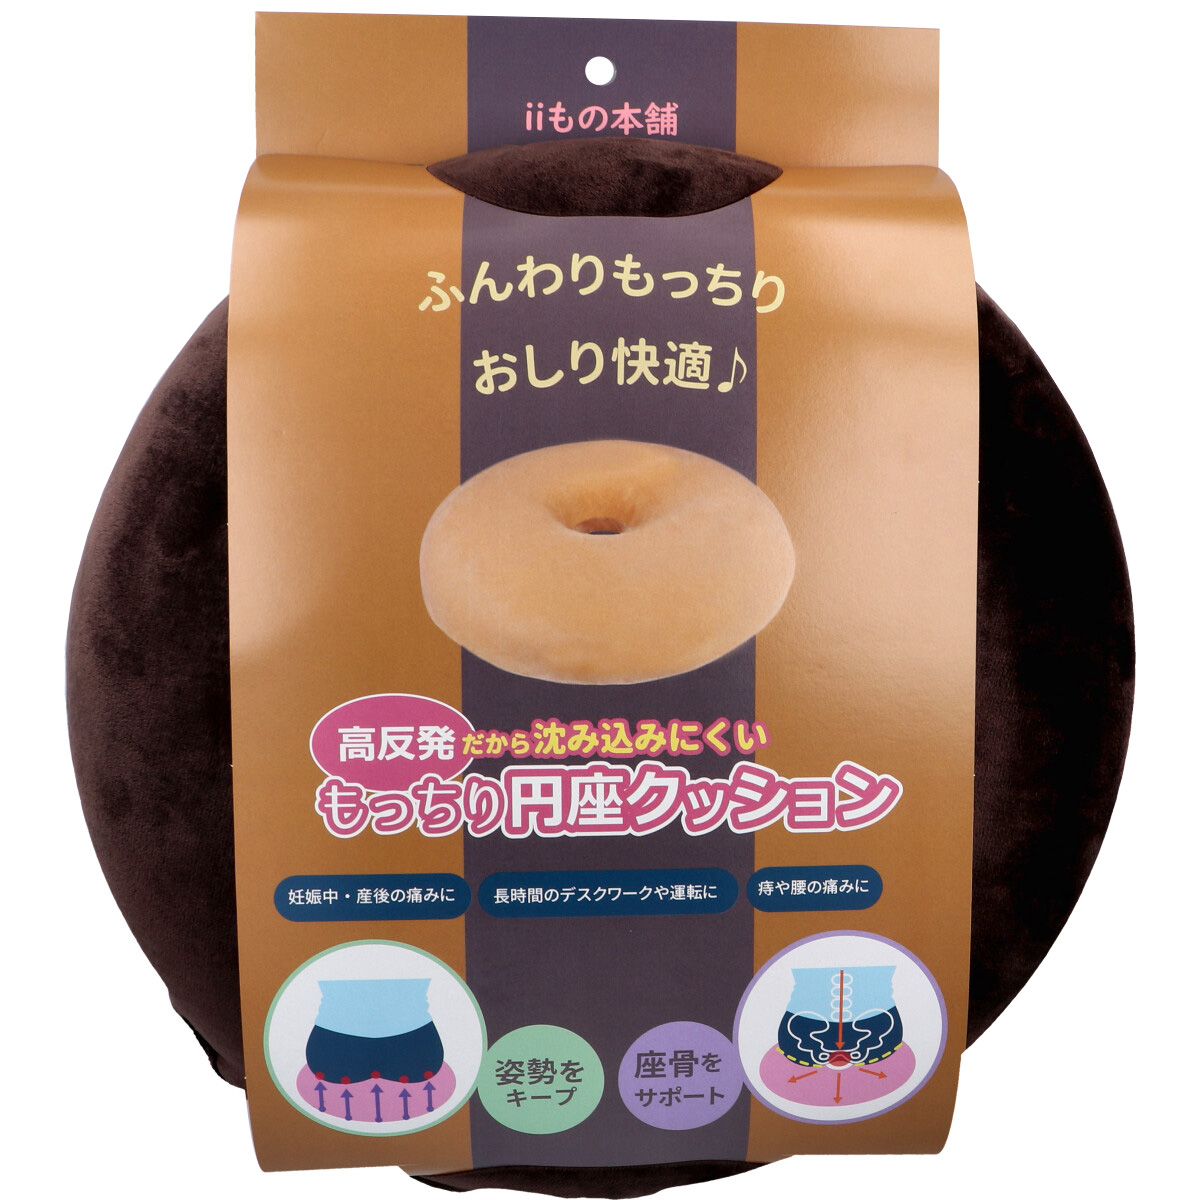 Picture of Brown color High Resilience Donut Cushion